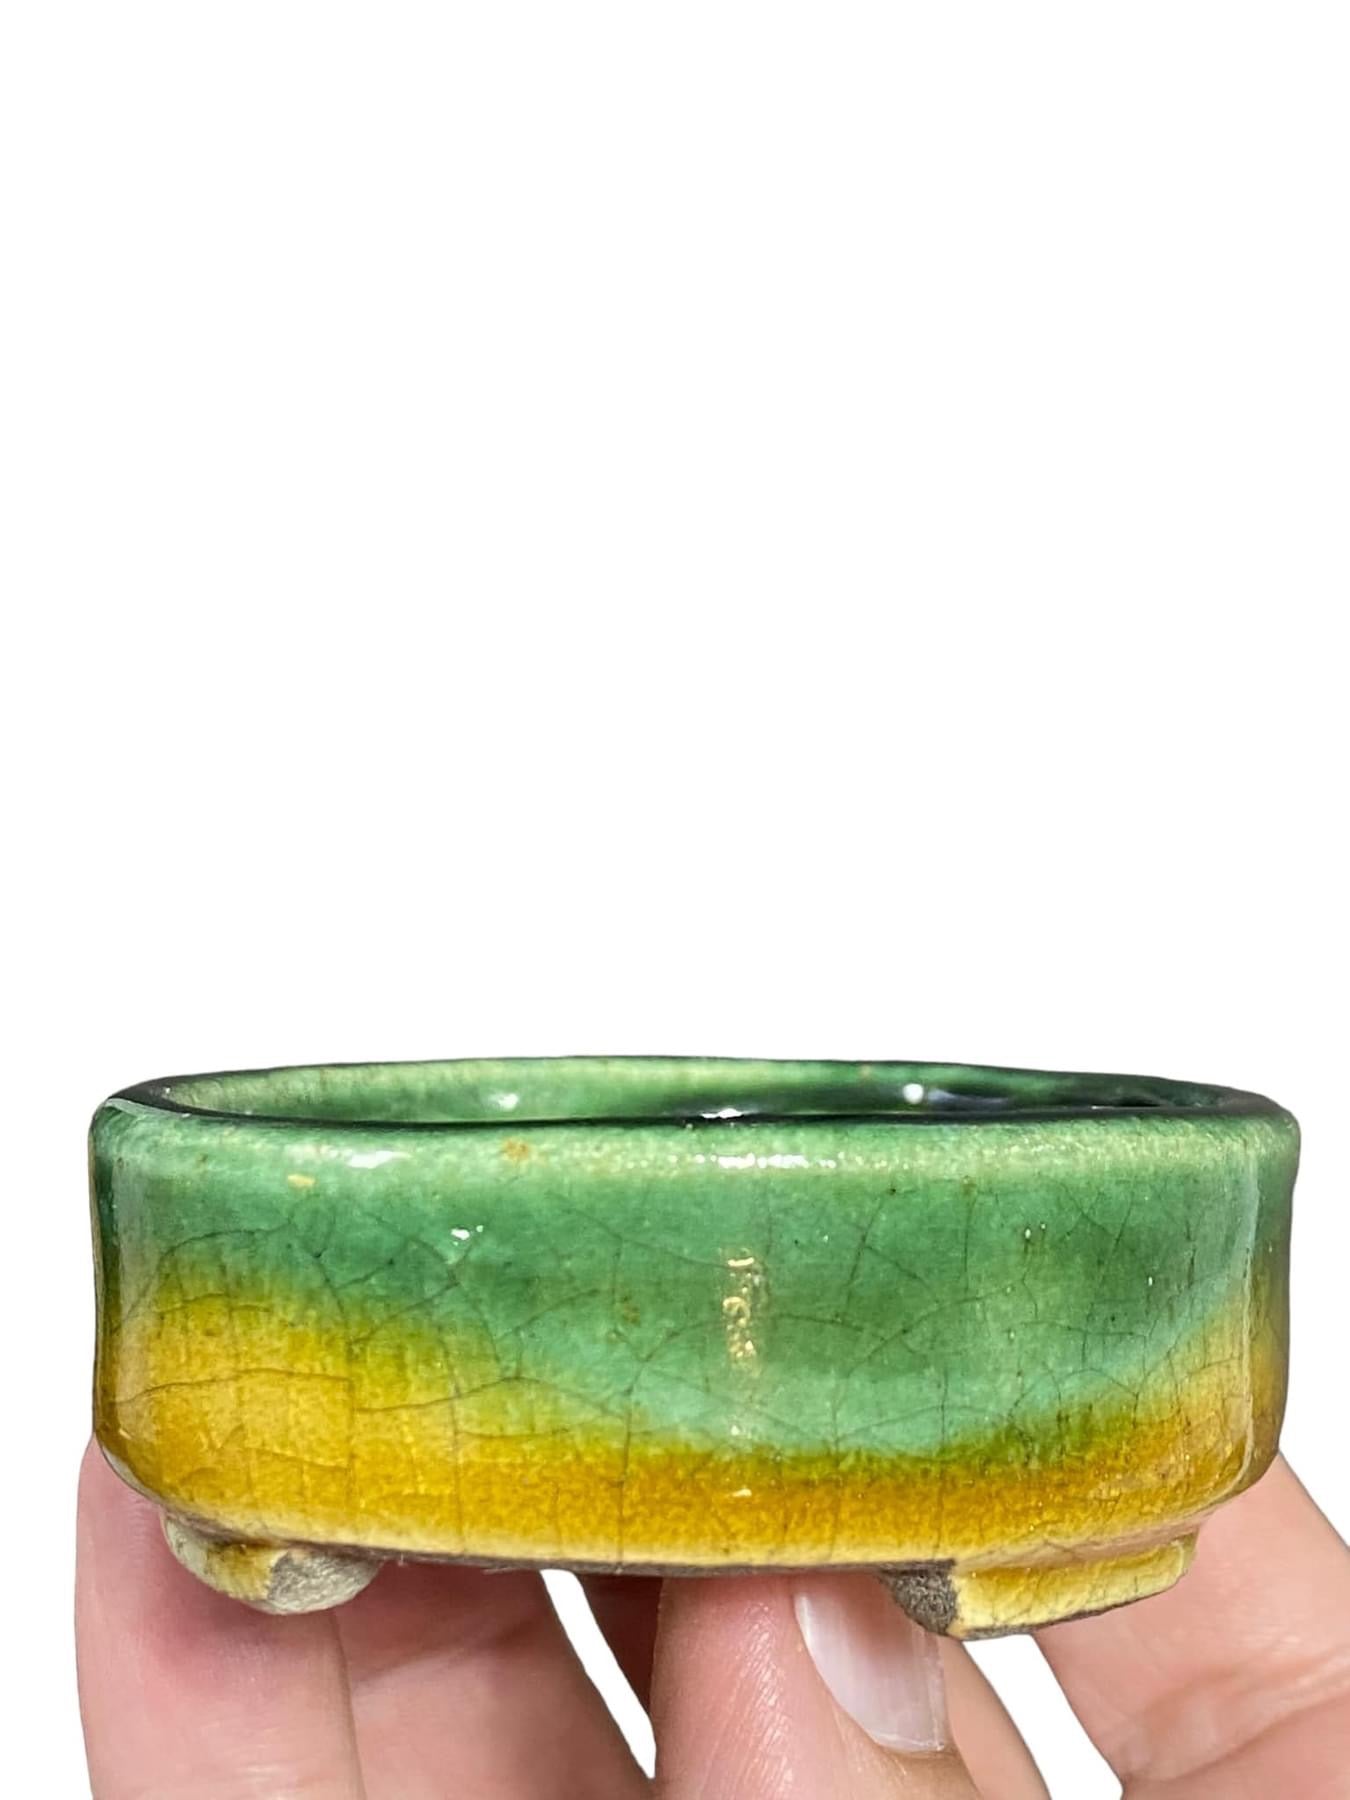 Satomi Terahata - Green and Yellow Crackle Oval Pot (3-3/4” wide)